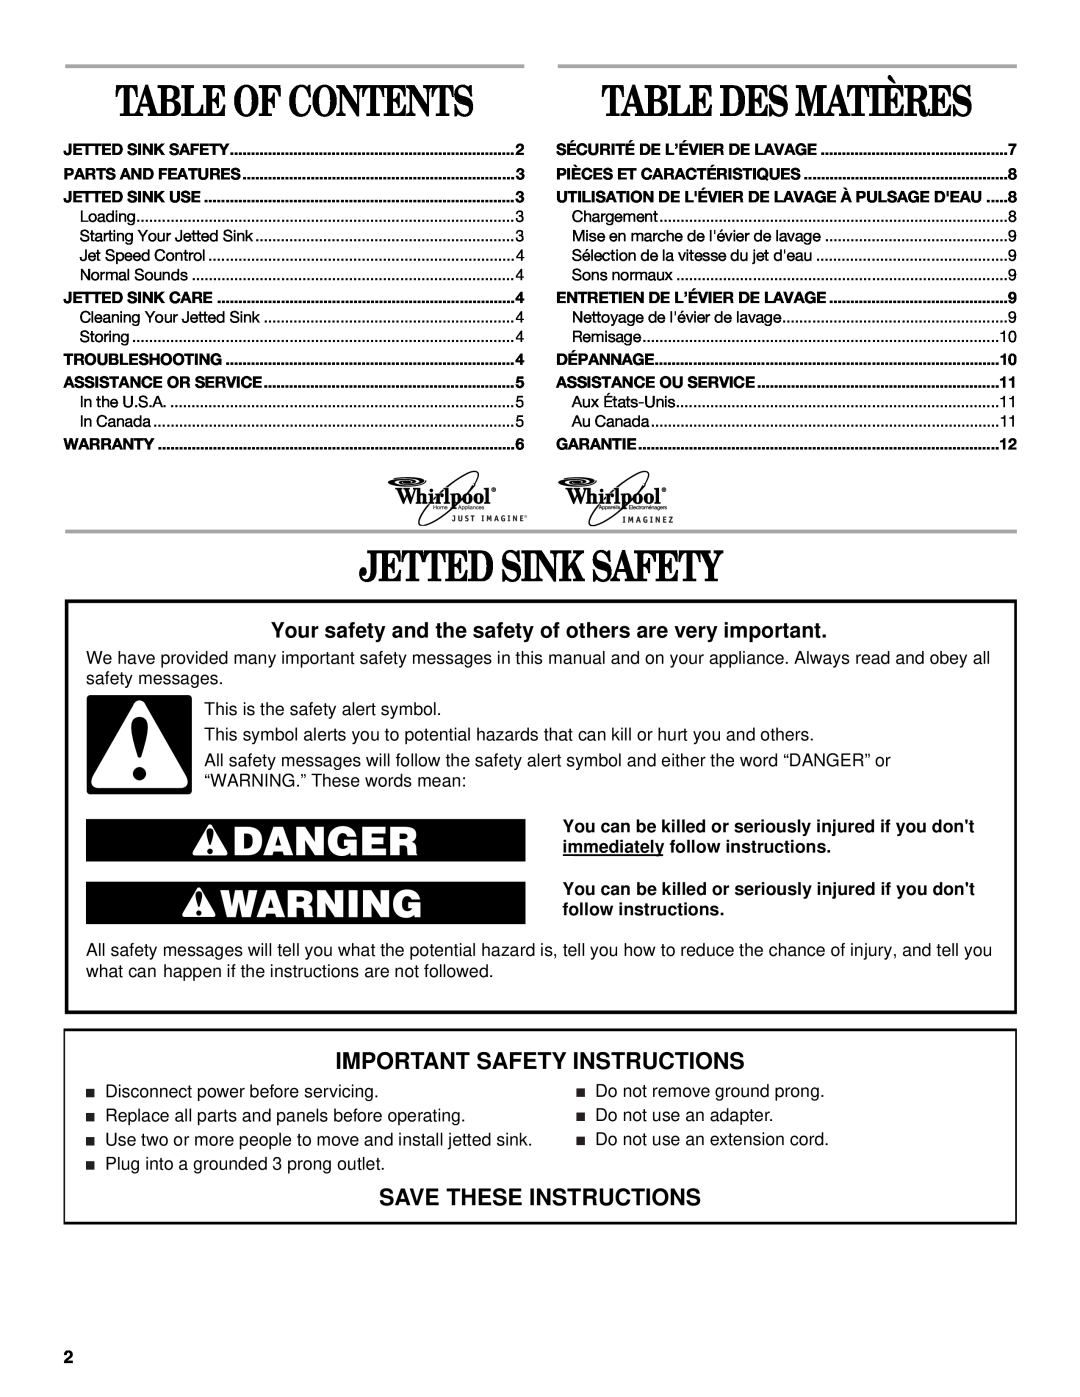 Whirlpool JETTED SINK manual Jetted Sink Safety, Table Of Contents, Important Safety Instructions, Save These Instructions 